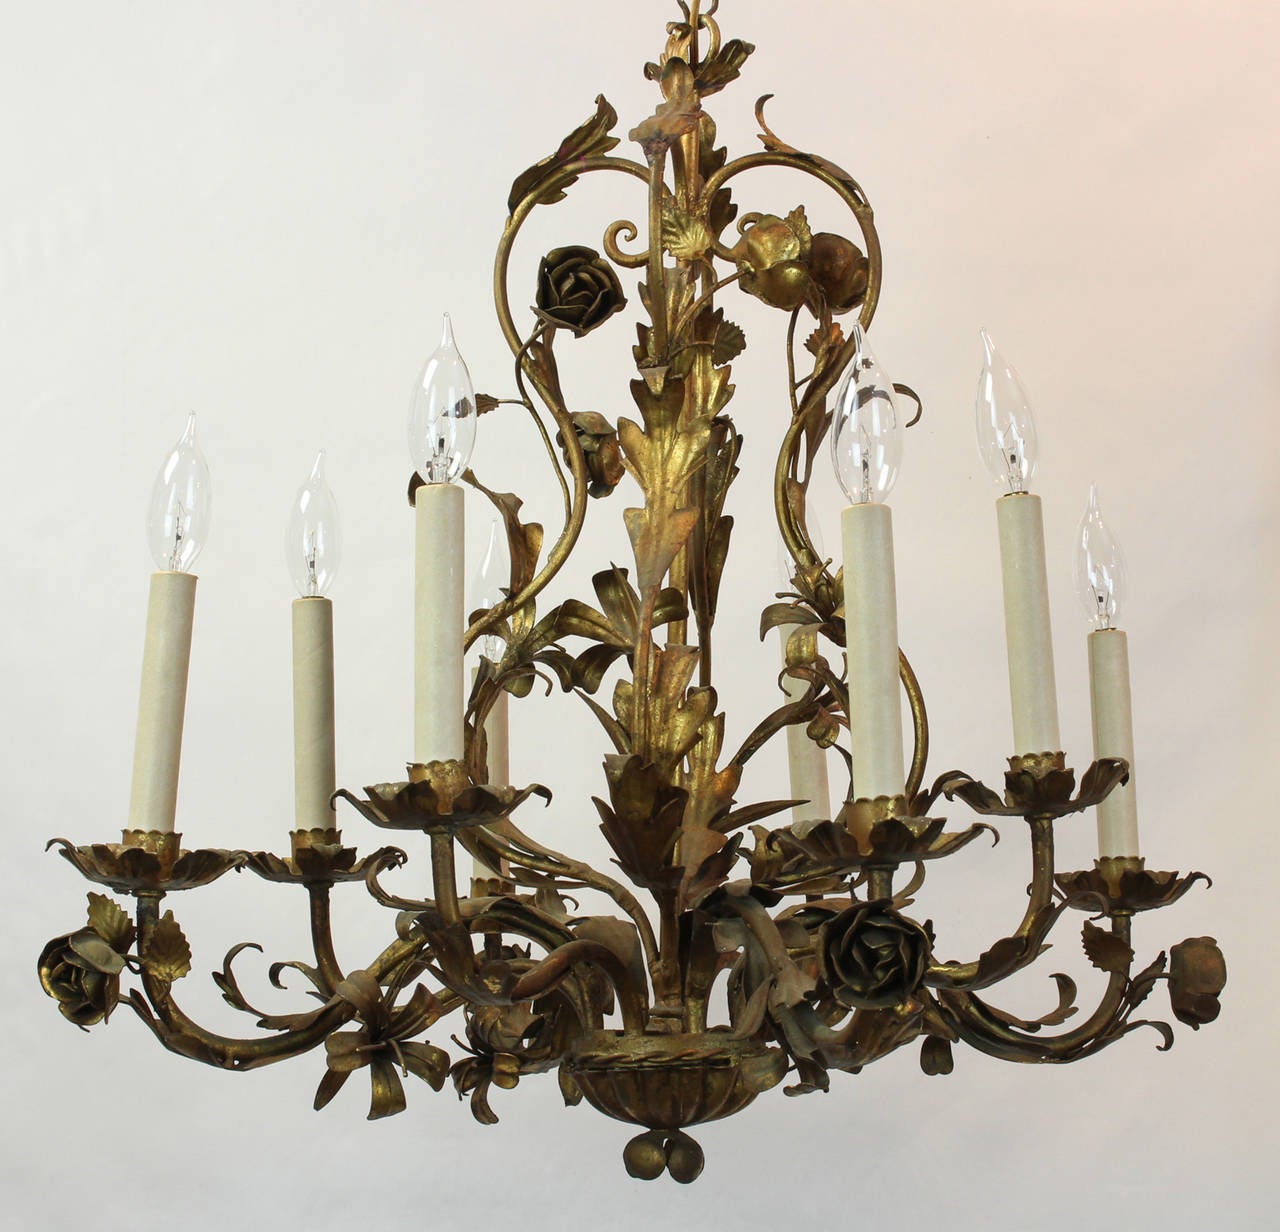 A large Italian gilt iron eight-light chandelier dating from the 1960s decorated with trailing vines and flowers.